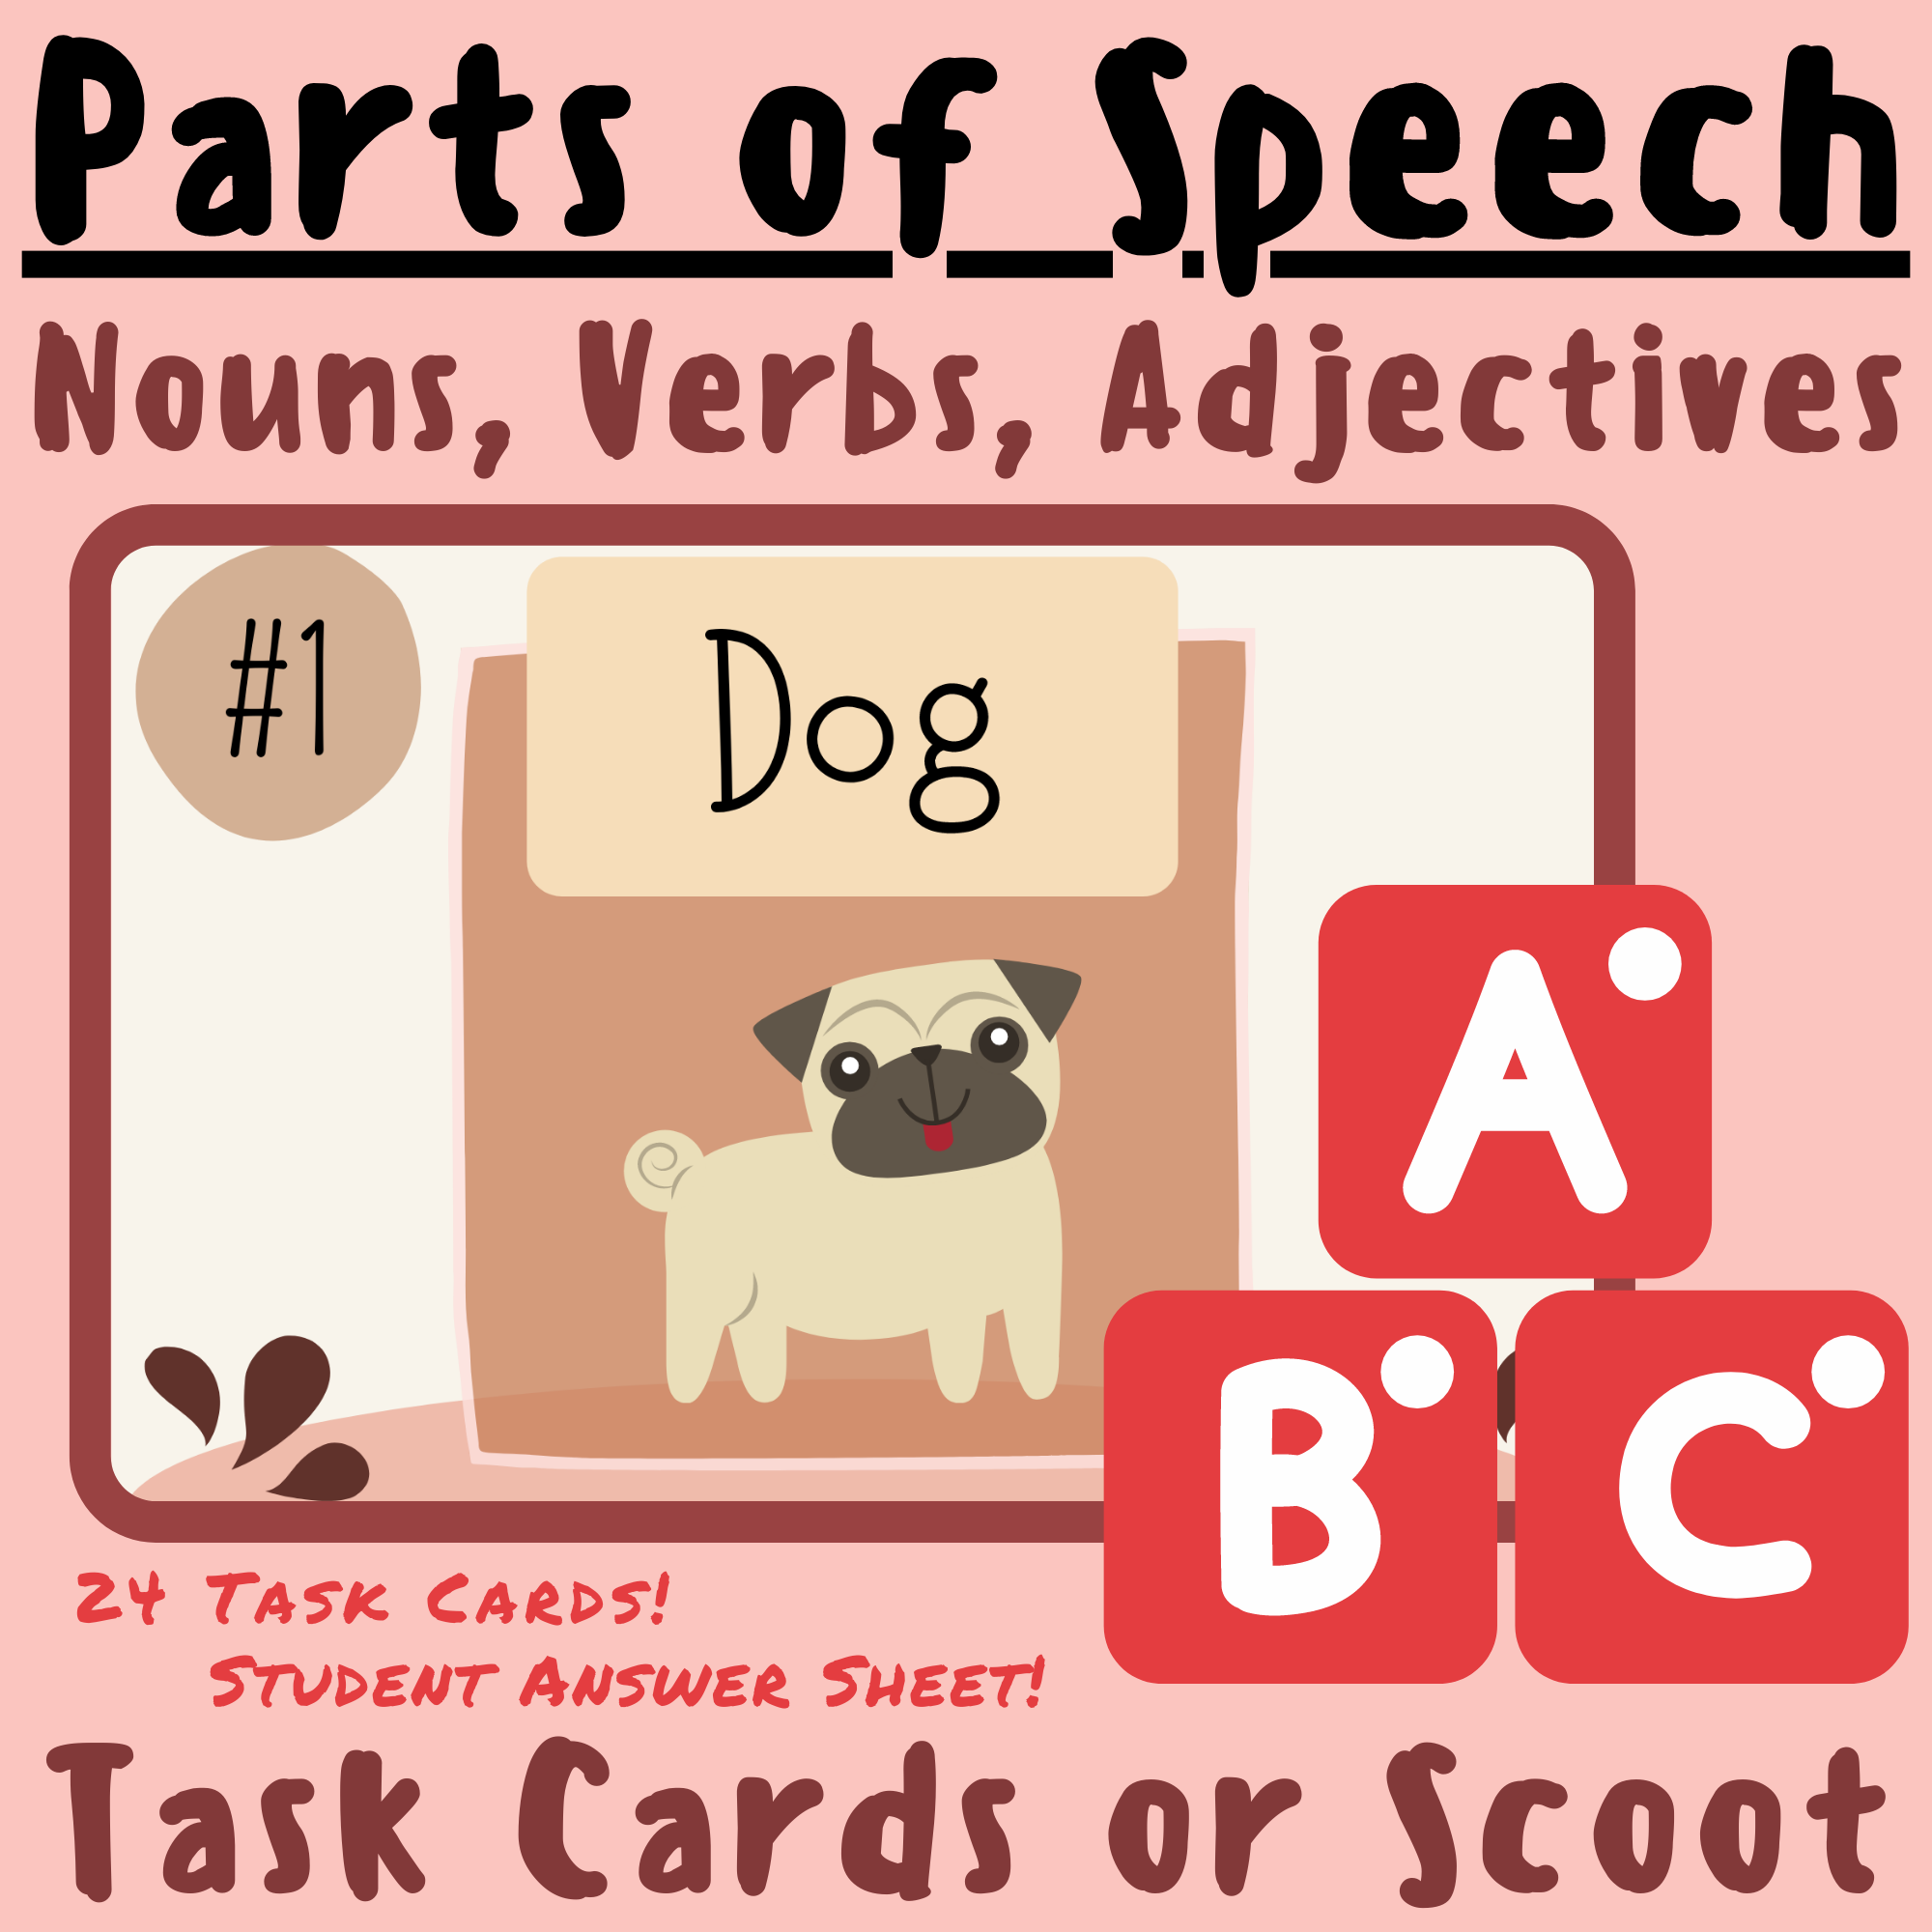 Parts of Speech (Nouns, Verbs, Adjectives) SCOOT or TASK CARDS; For K-5 Teachers and Students in the Language Arts, Phonics, Grammar, and Writing Classroom